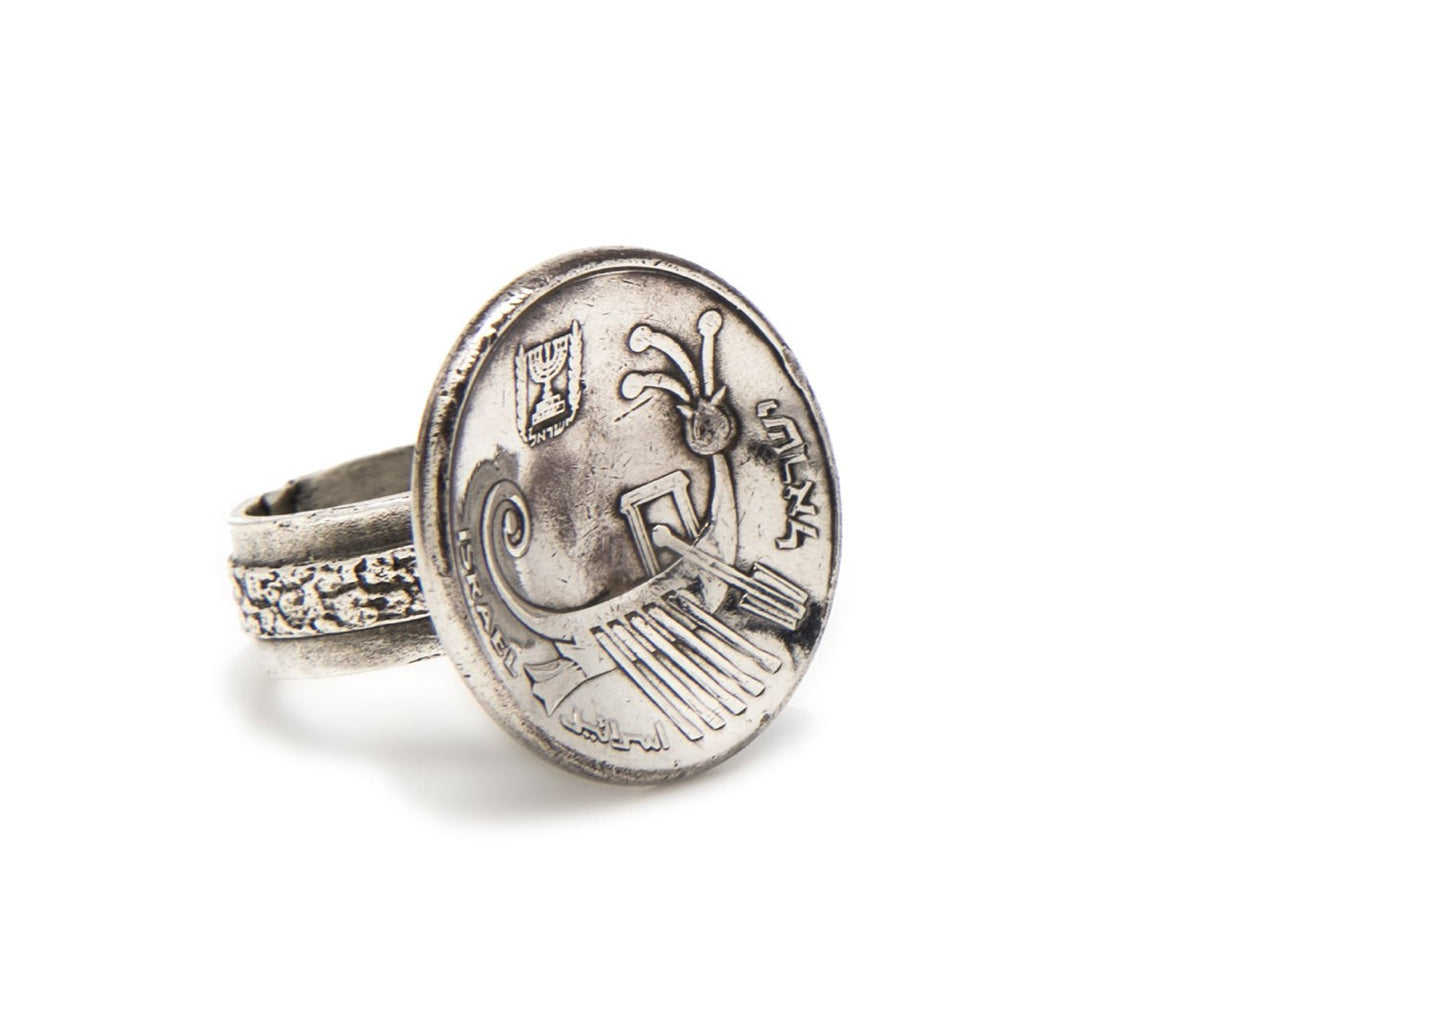 Israeli Old, Collector's Coin Ring - 10 sheqelim Antiqe Boat Ring